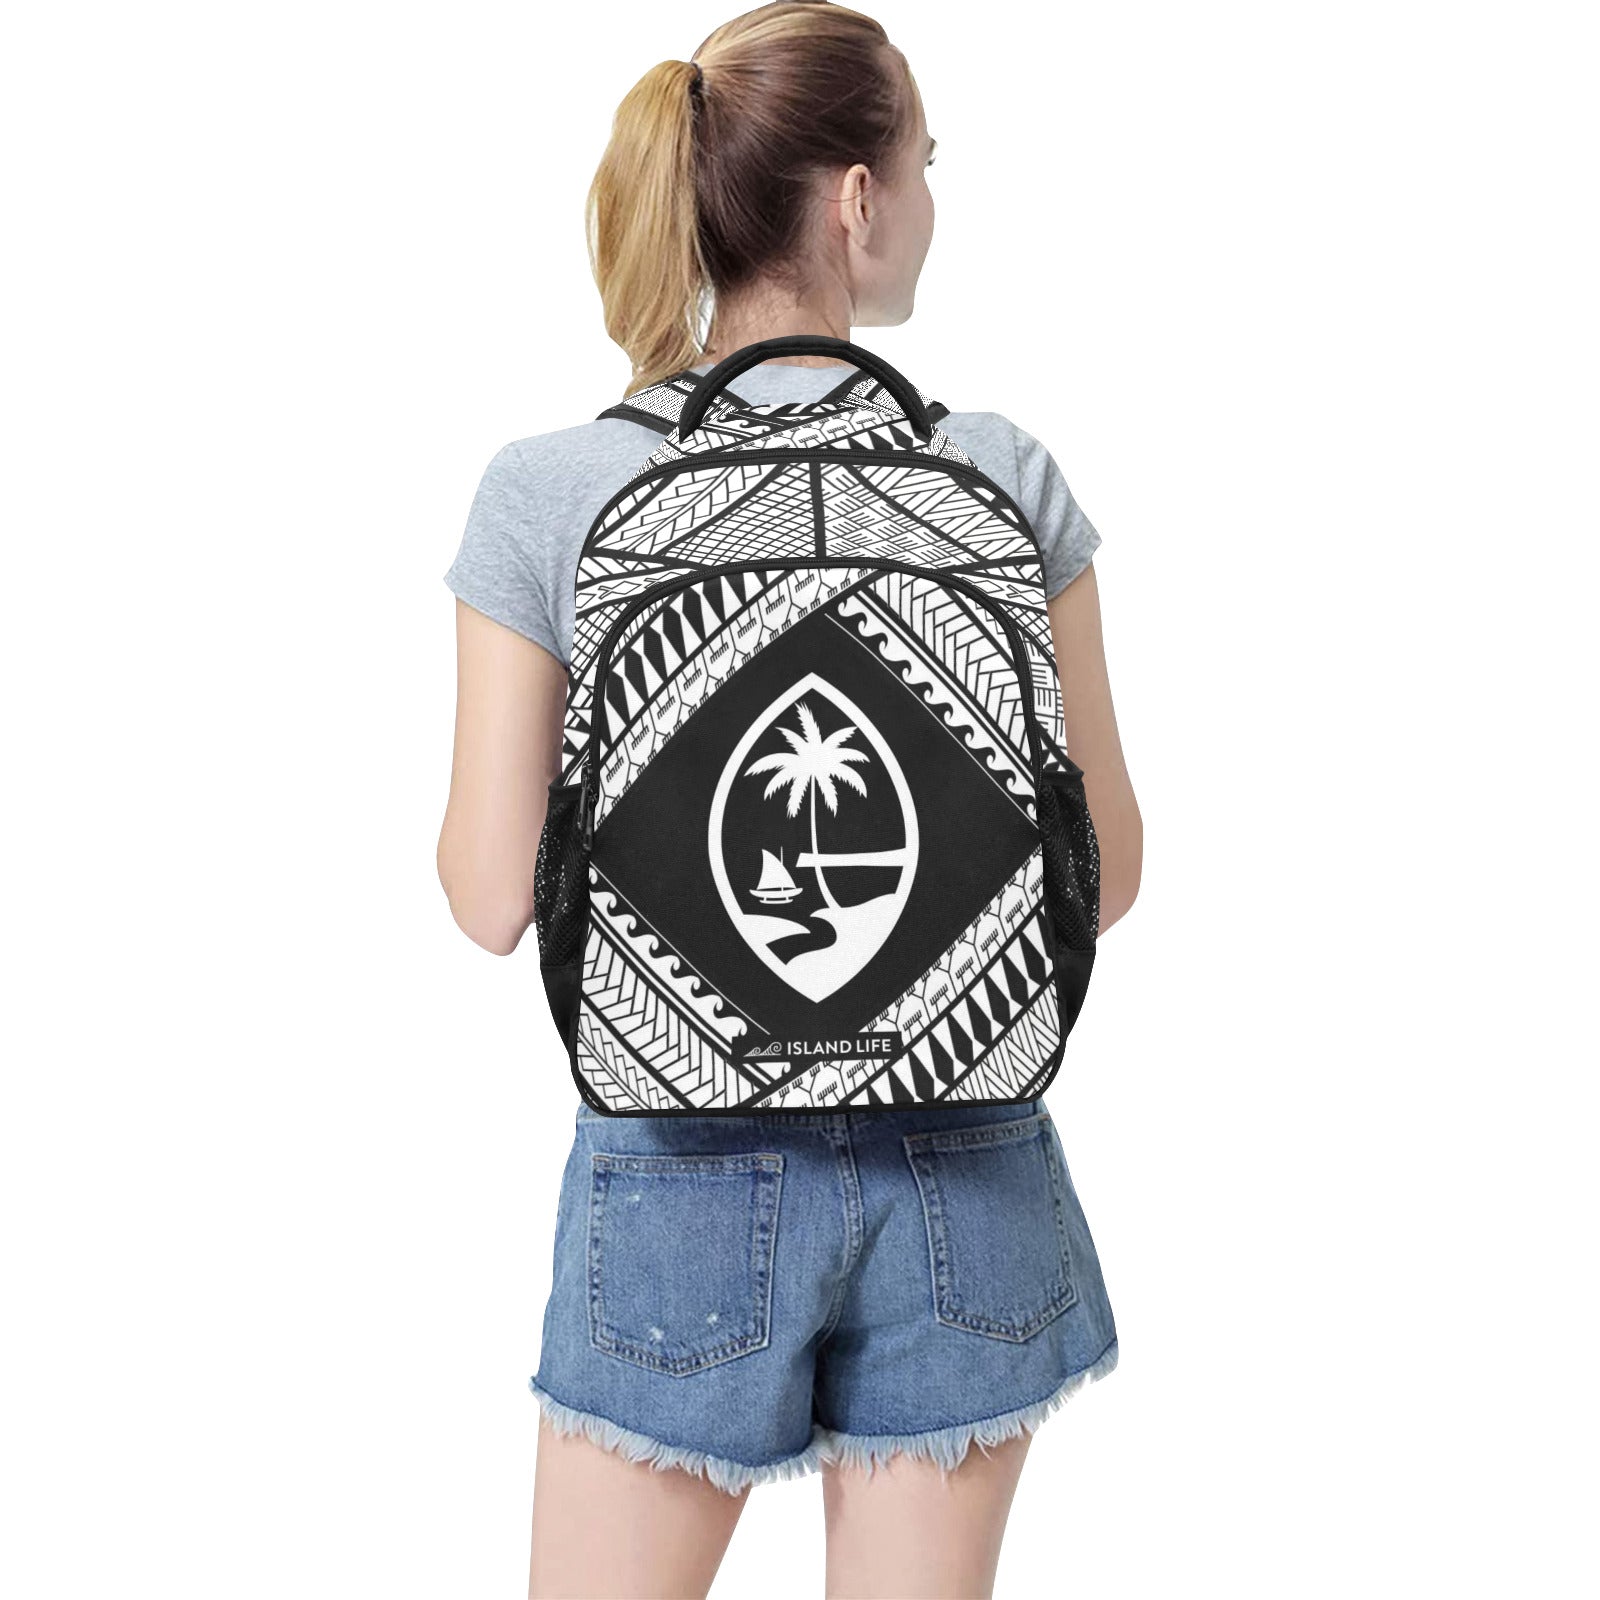 Guahan Tribal Black and White Multifunctional Backpack